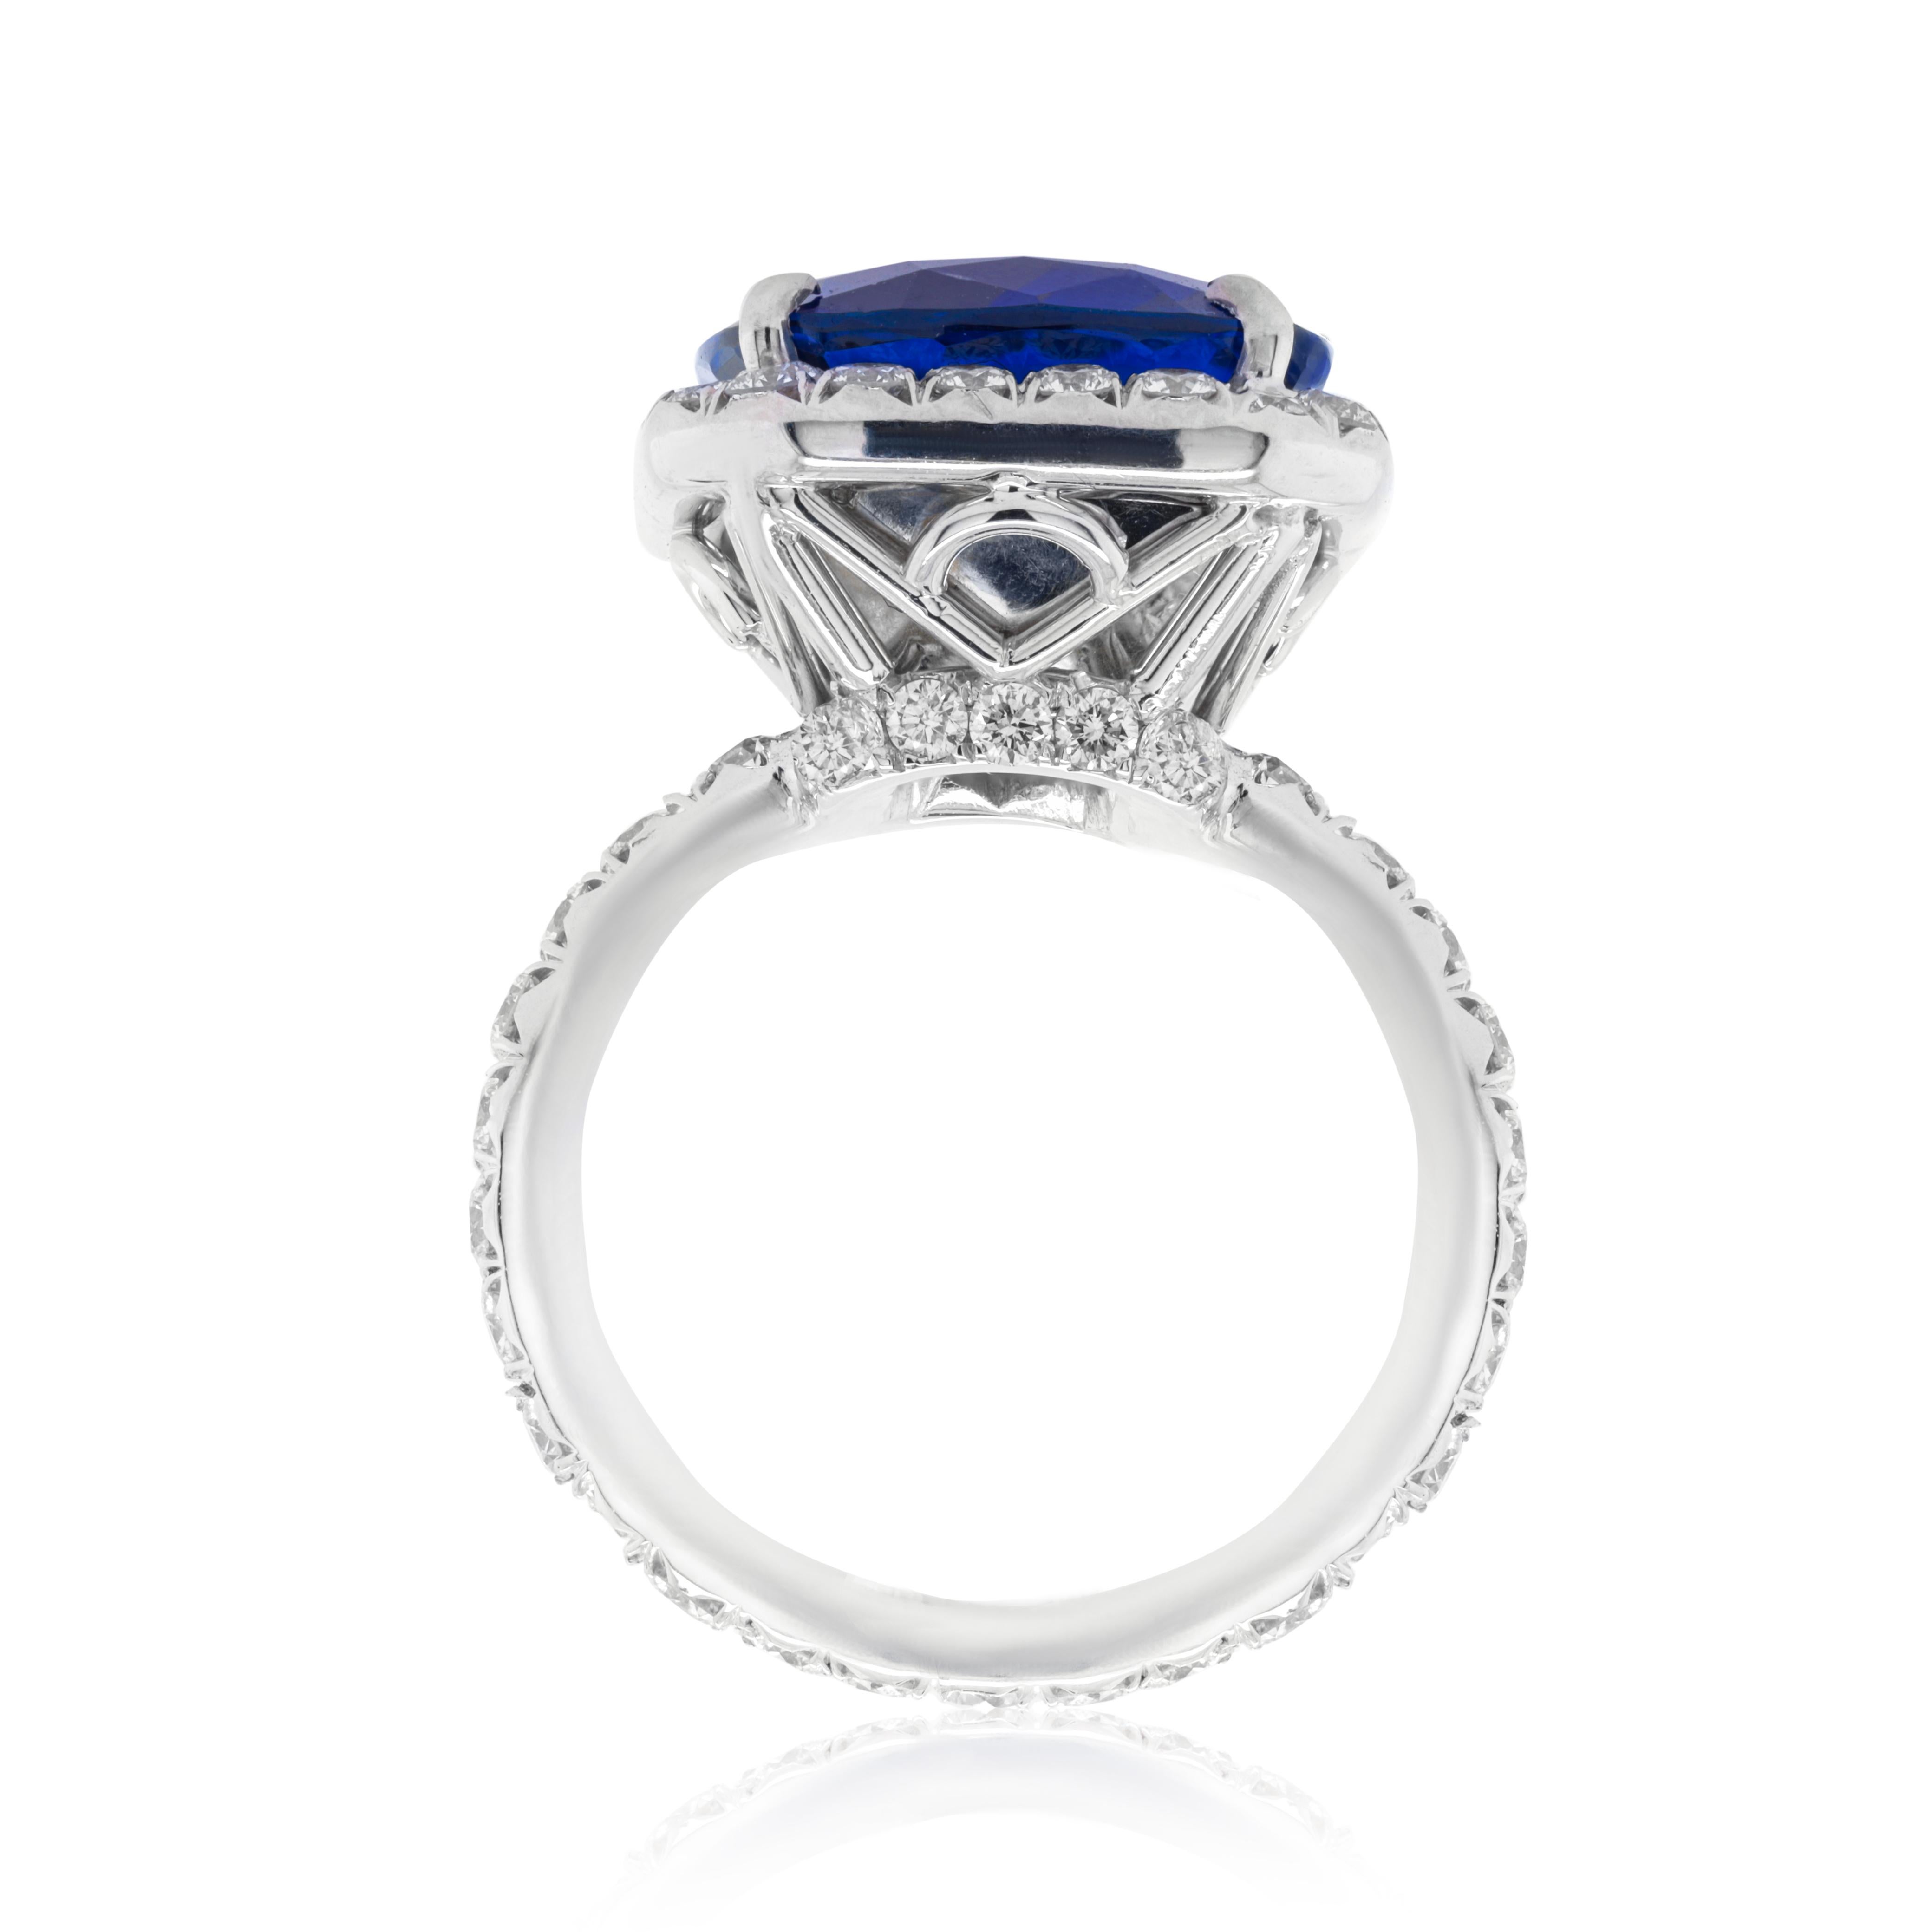 Platinum Sapphire Ring with unheated 13.42ct Cushion cut, Ceylon Sapphire. Surrounded by 1.50ct of diamonds. Sapphire is certified by GRS
